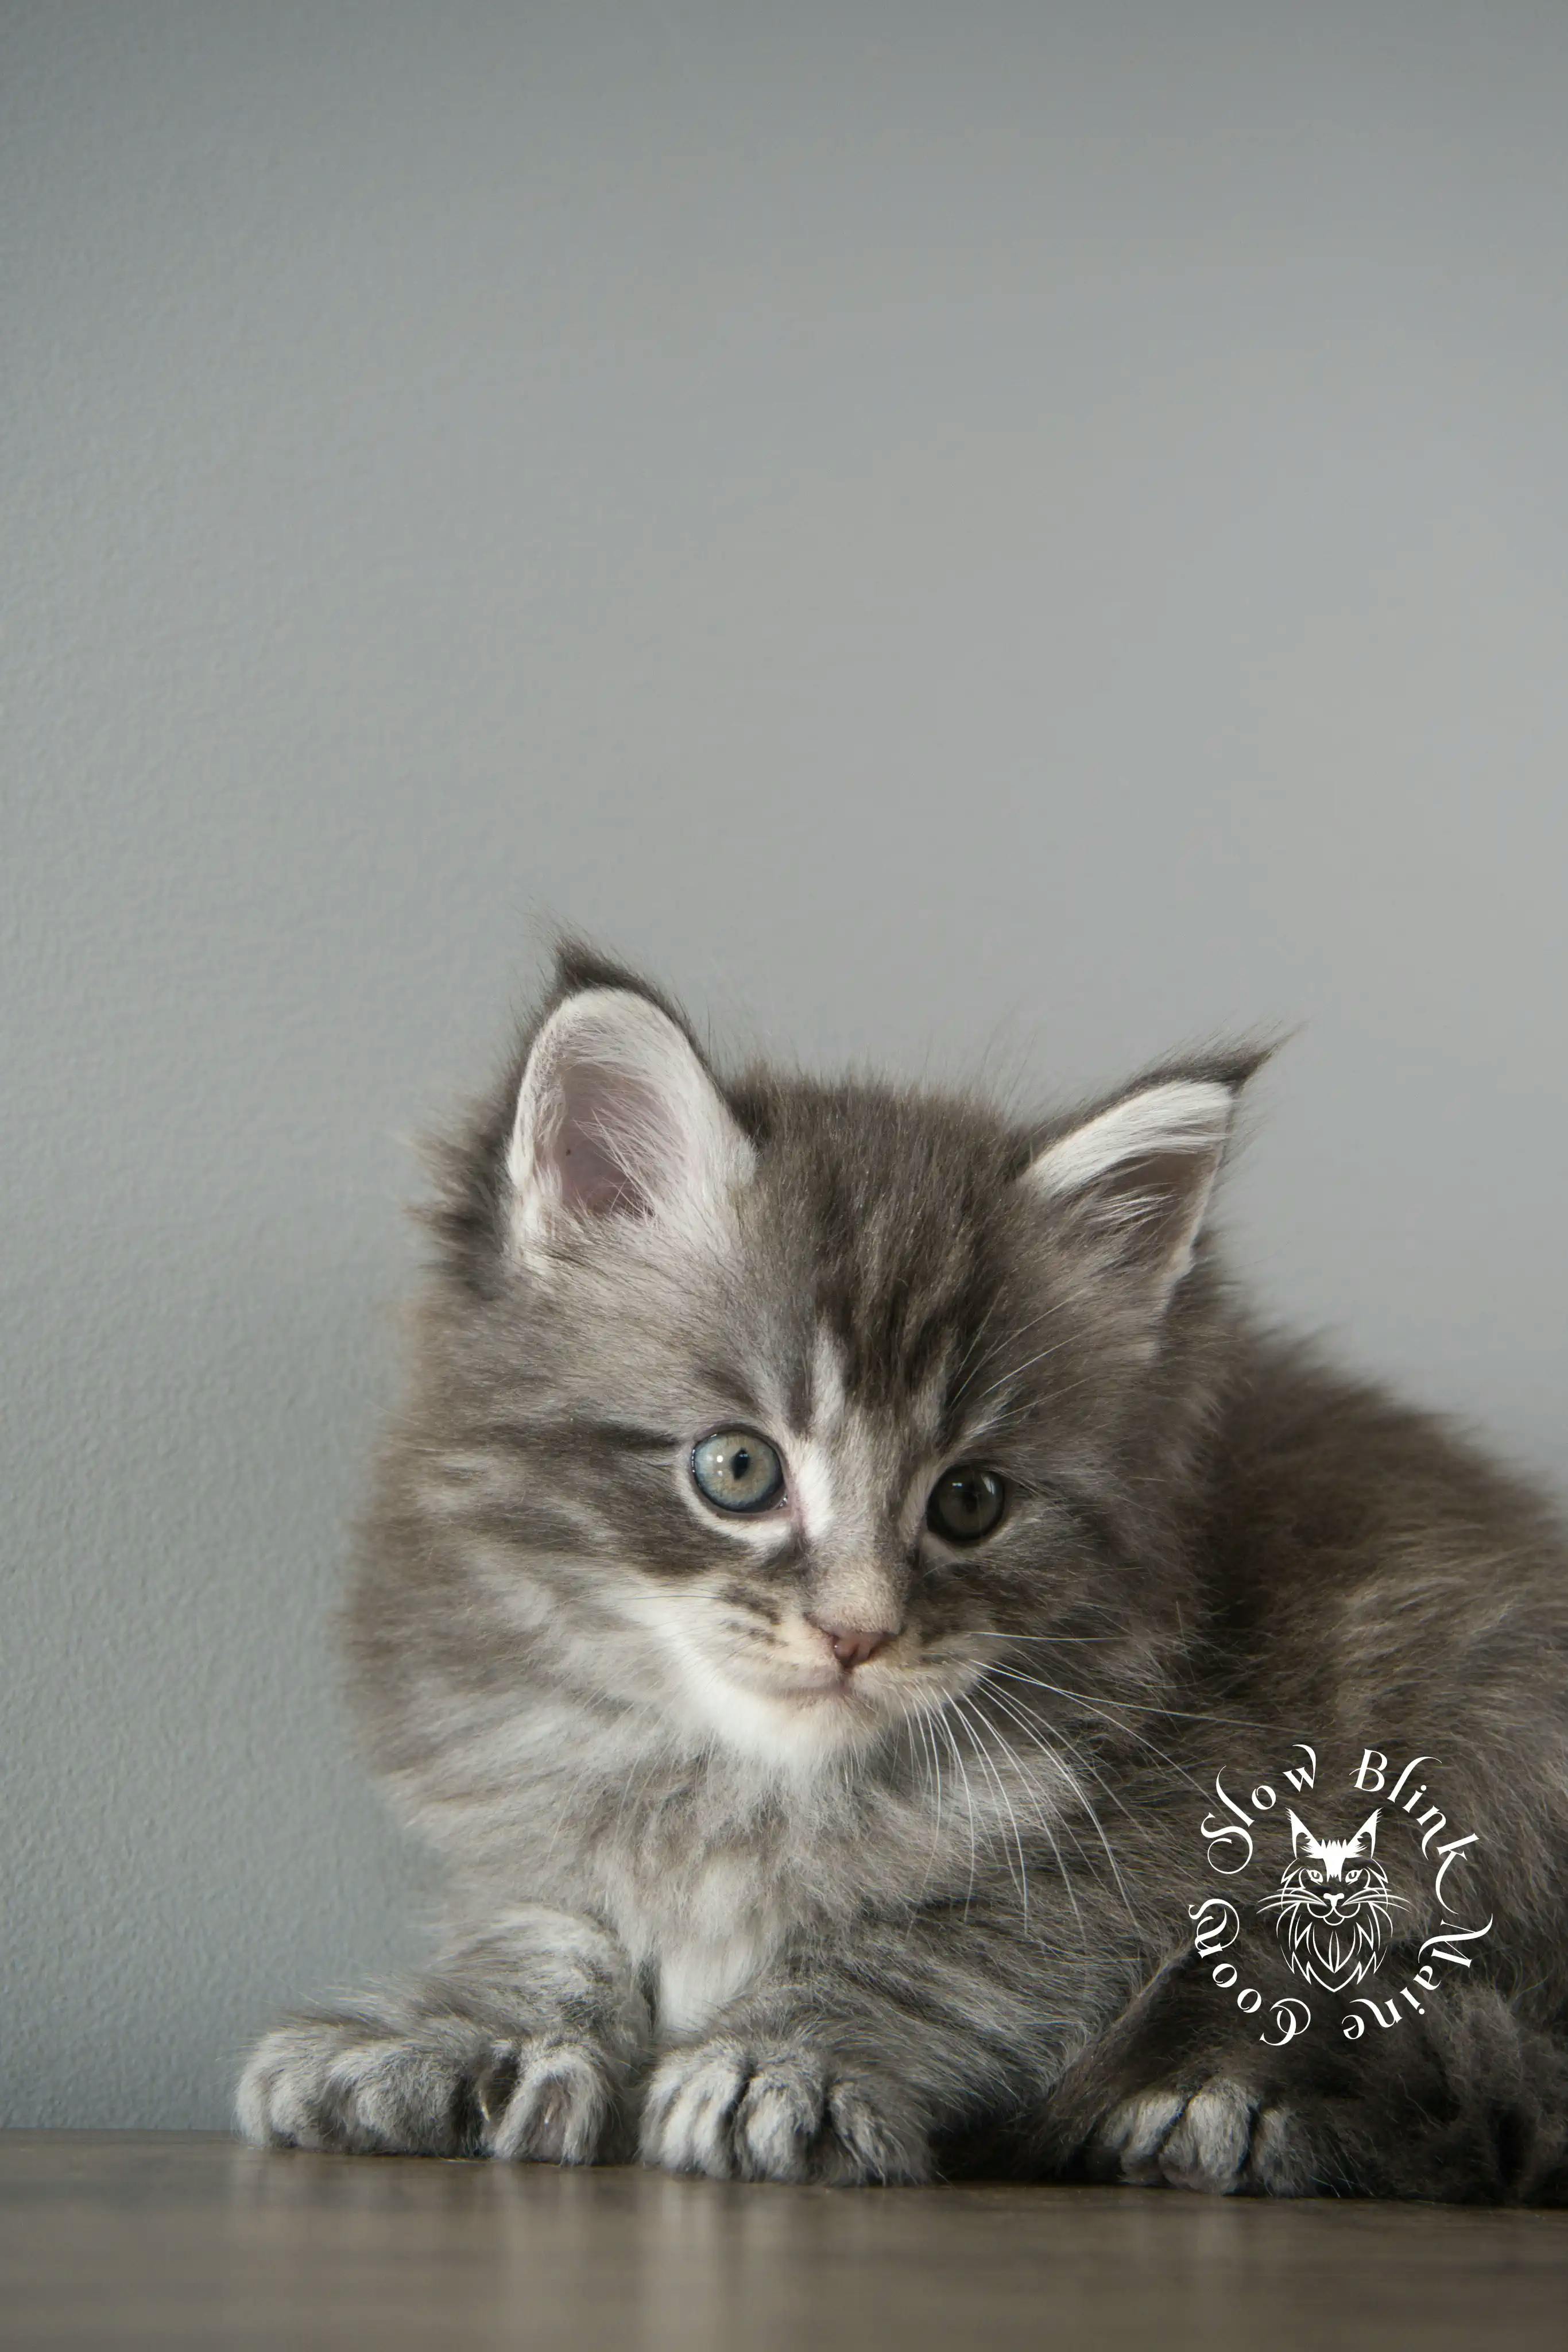 Blue Silver Tabby Maine Coon Kittens > blue silver tabby maine coon kitten | slowblinkmainecoons | 02